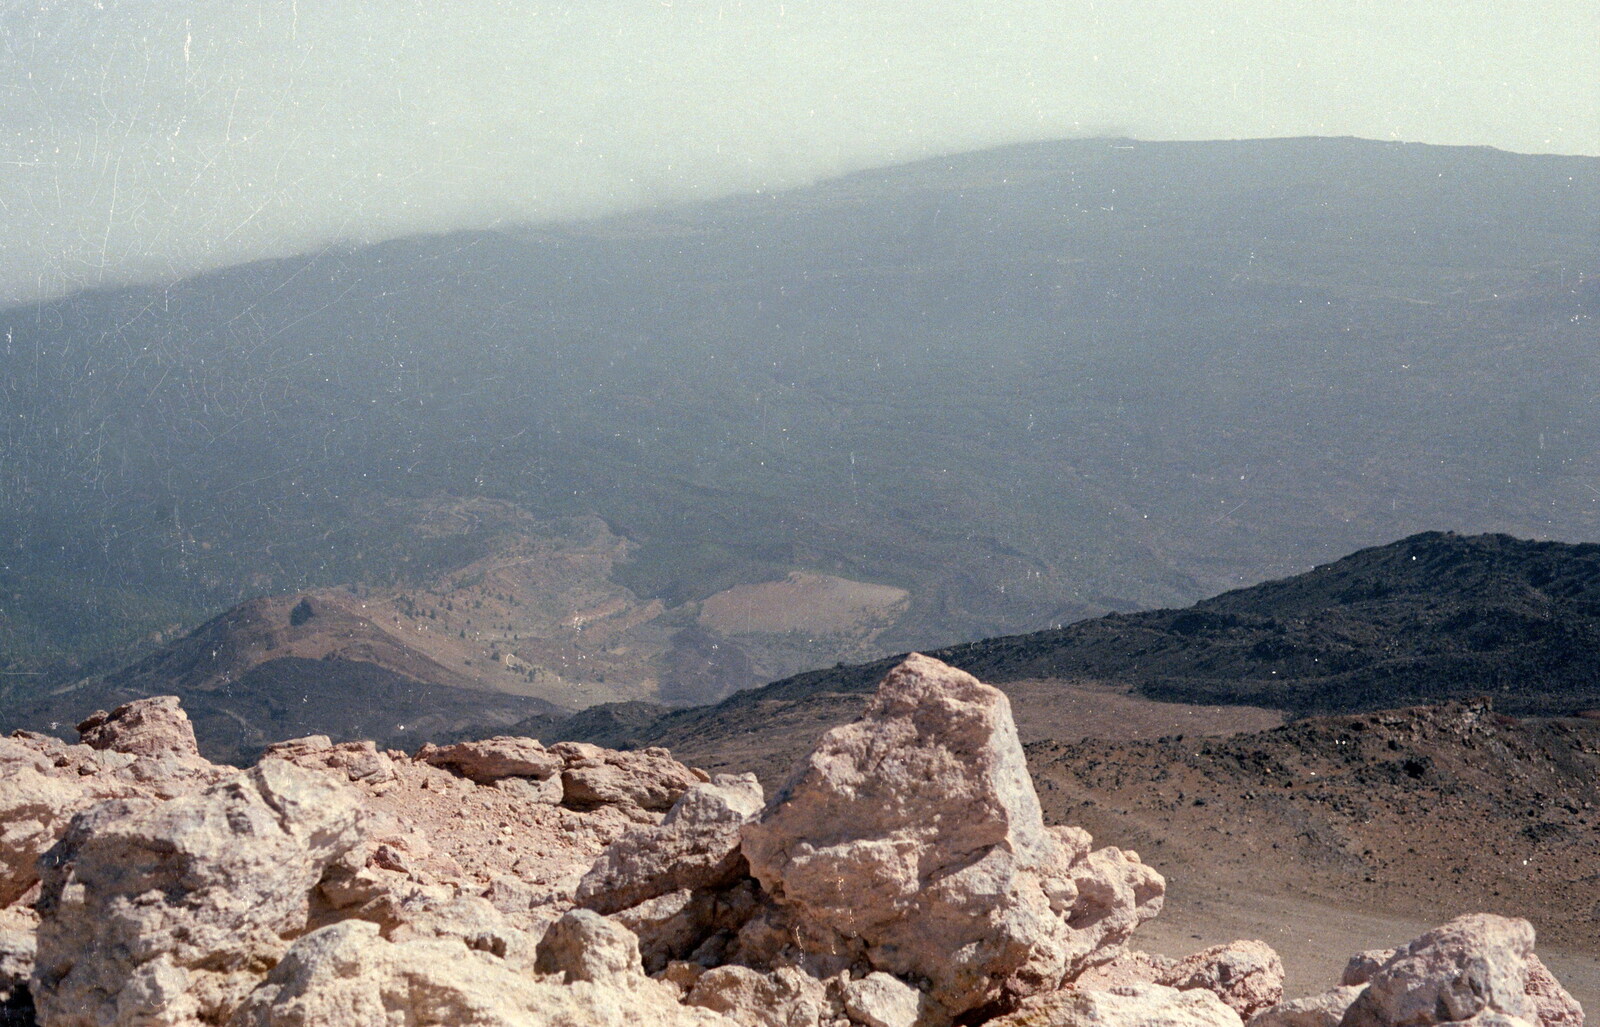 A mist rolls in on the sea-side of the mountain from A Holiday in Los Christianos, Tenerife - 19th June 1985